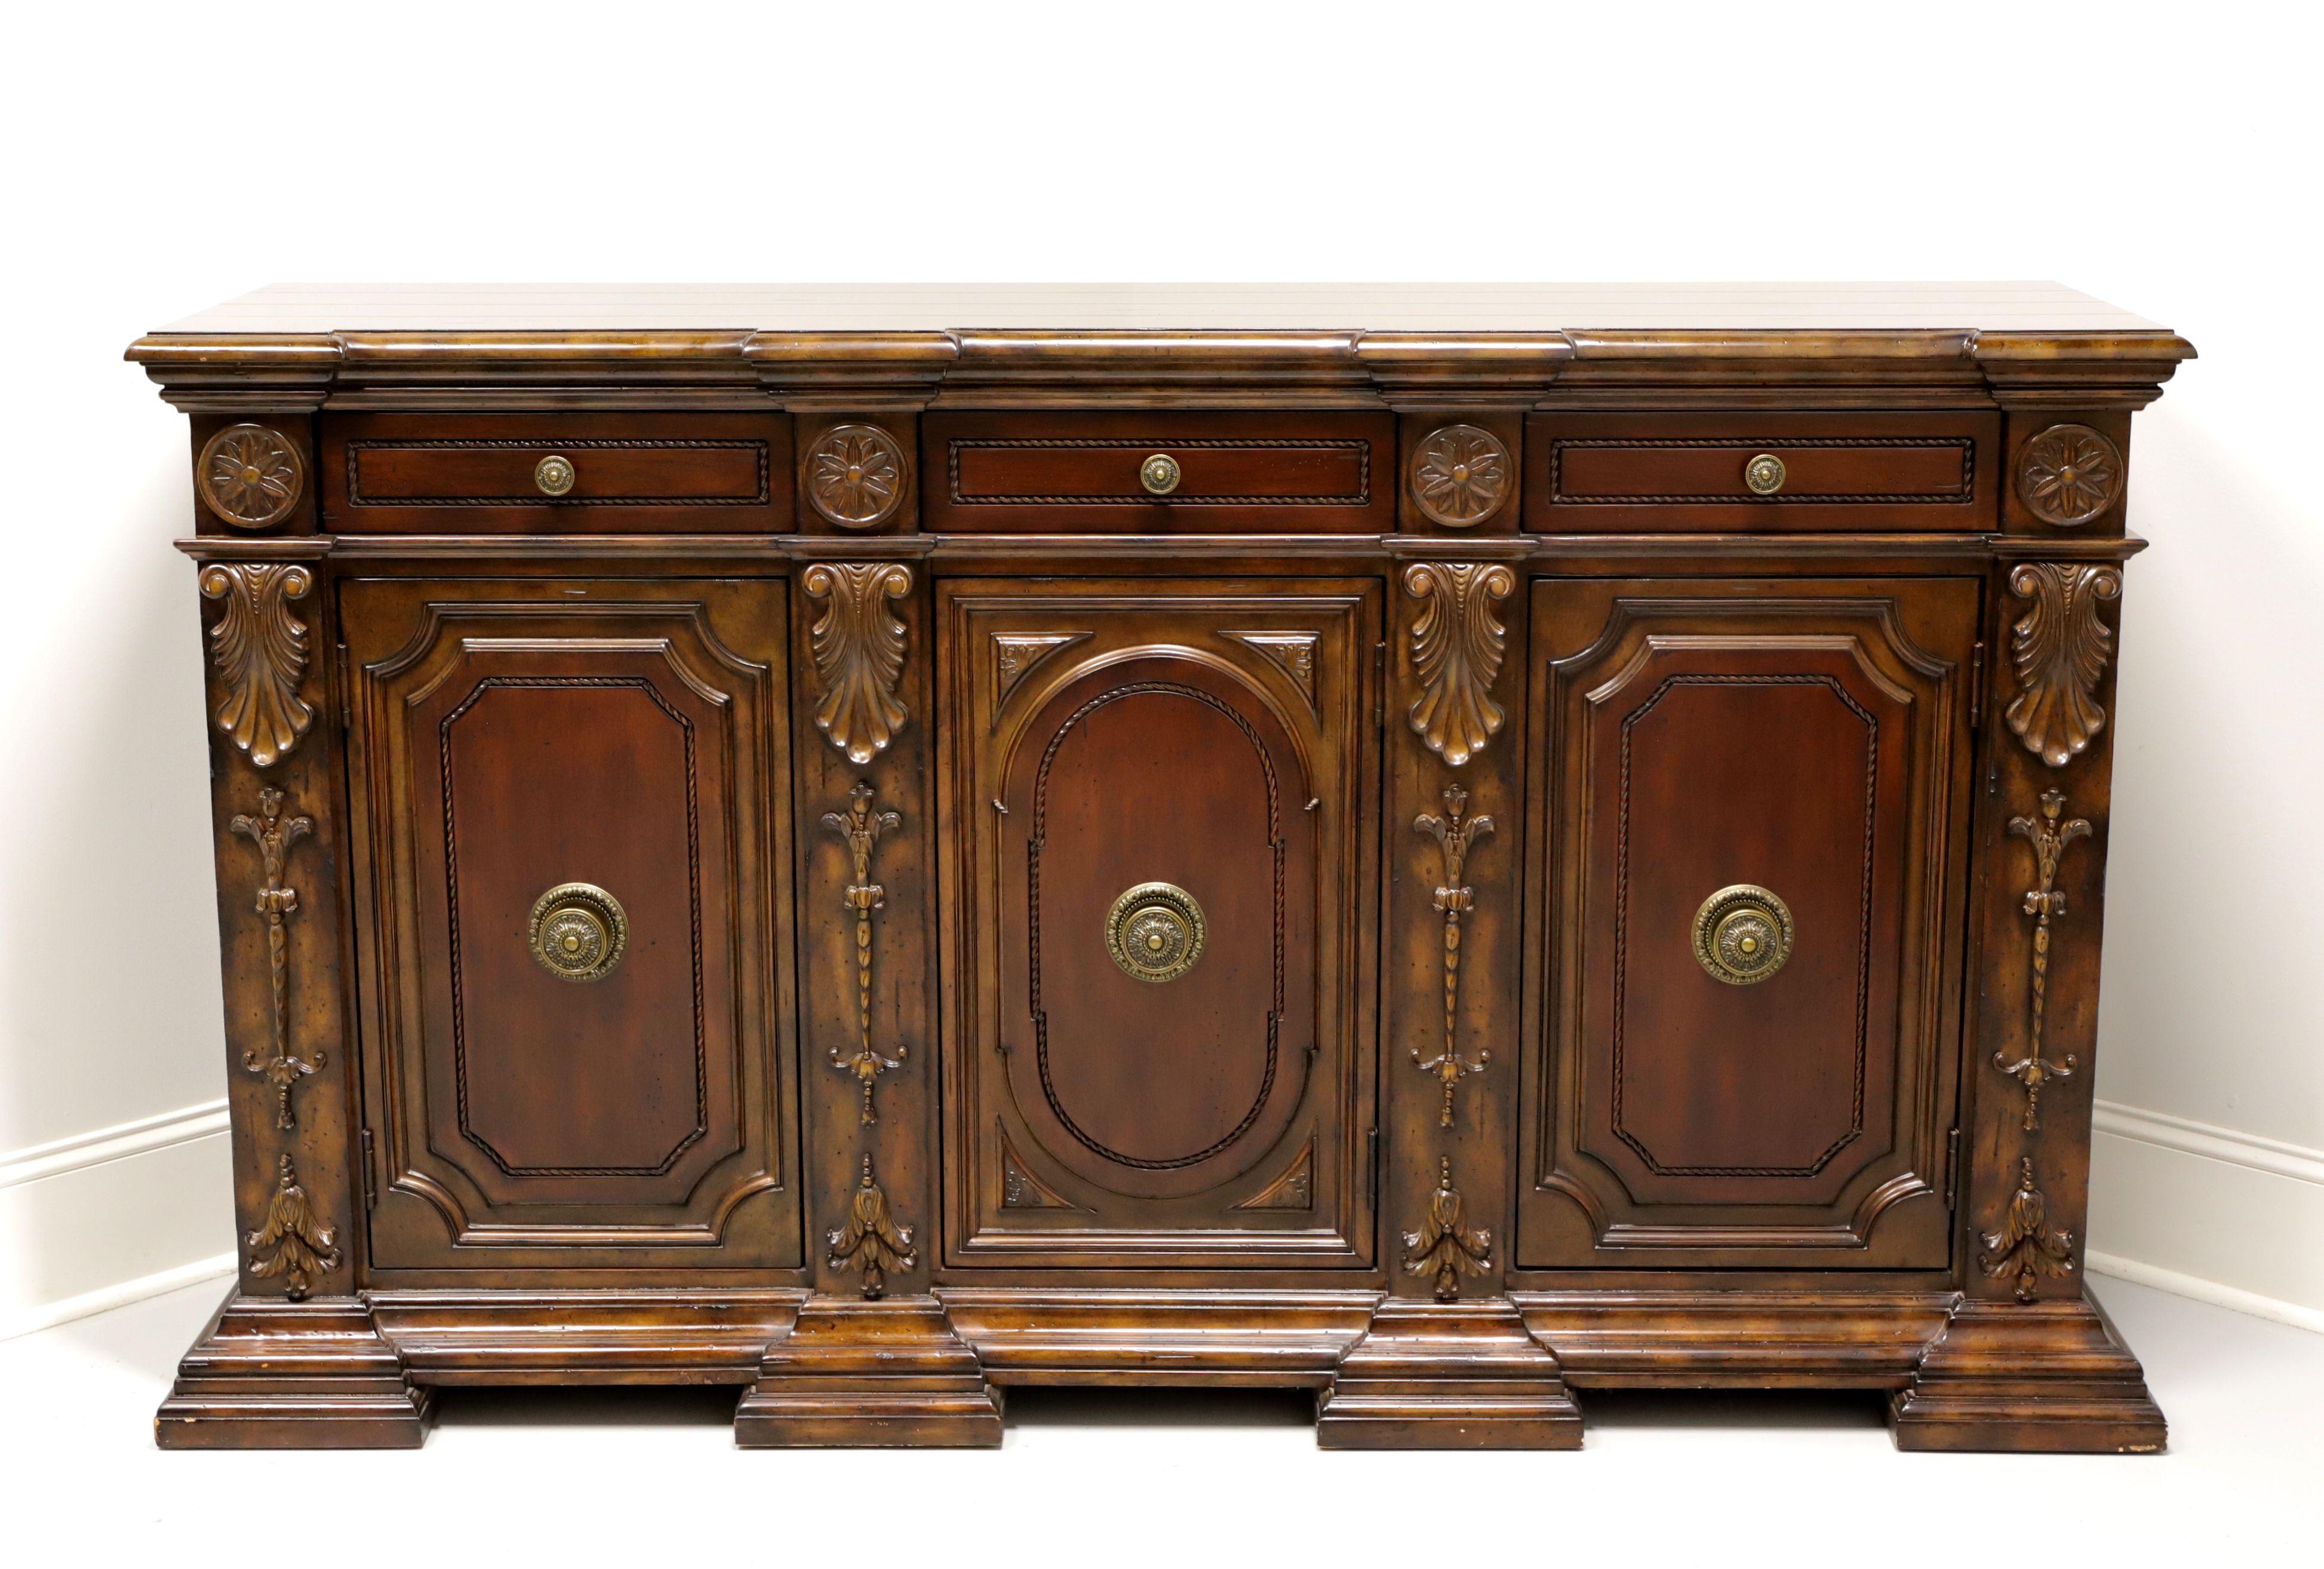 A Transitional style, monumentally sized, tall credenza, unbranded, similar quality to Hickory White. Mahogany with slightly distressed finish, plank style top, brass hardware, carved medillions and decorative foliate to front four columns. Features